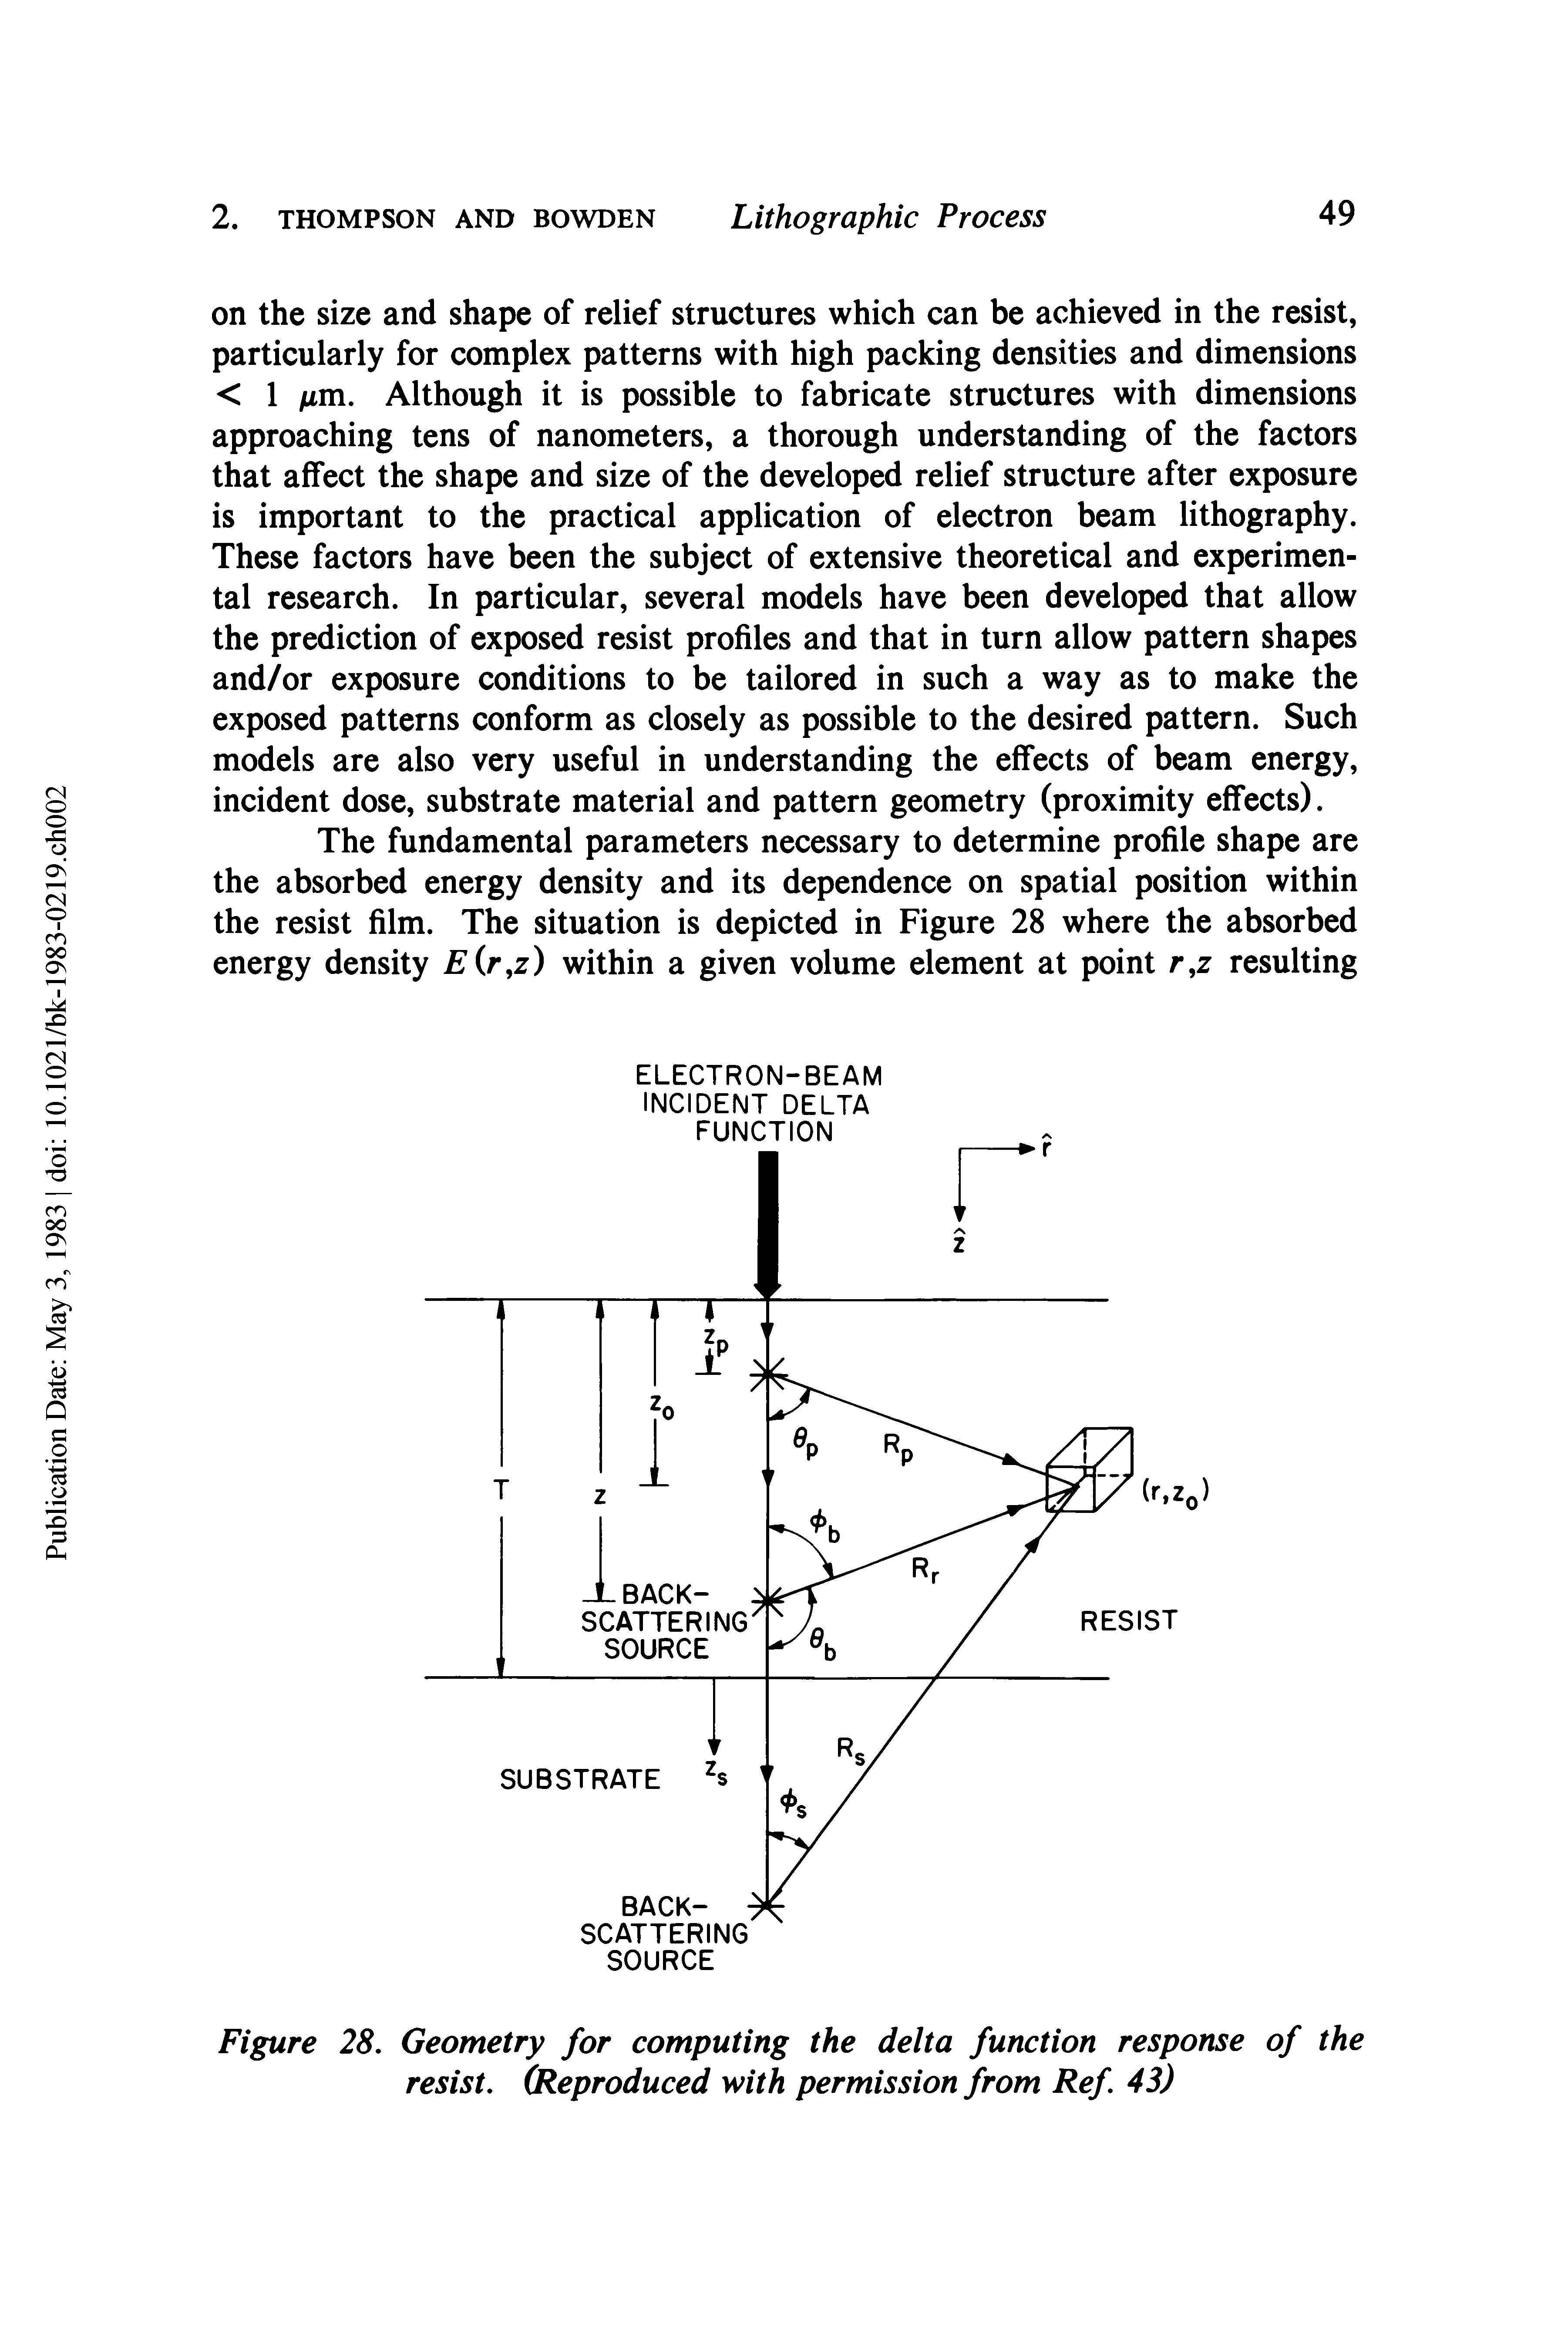 Figure 28. Geometry for computing the delta function response of the resist. (Reproduced with permission from Ref. 43)...